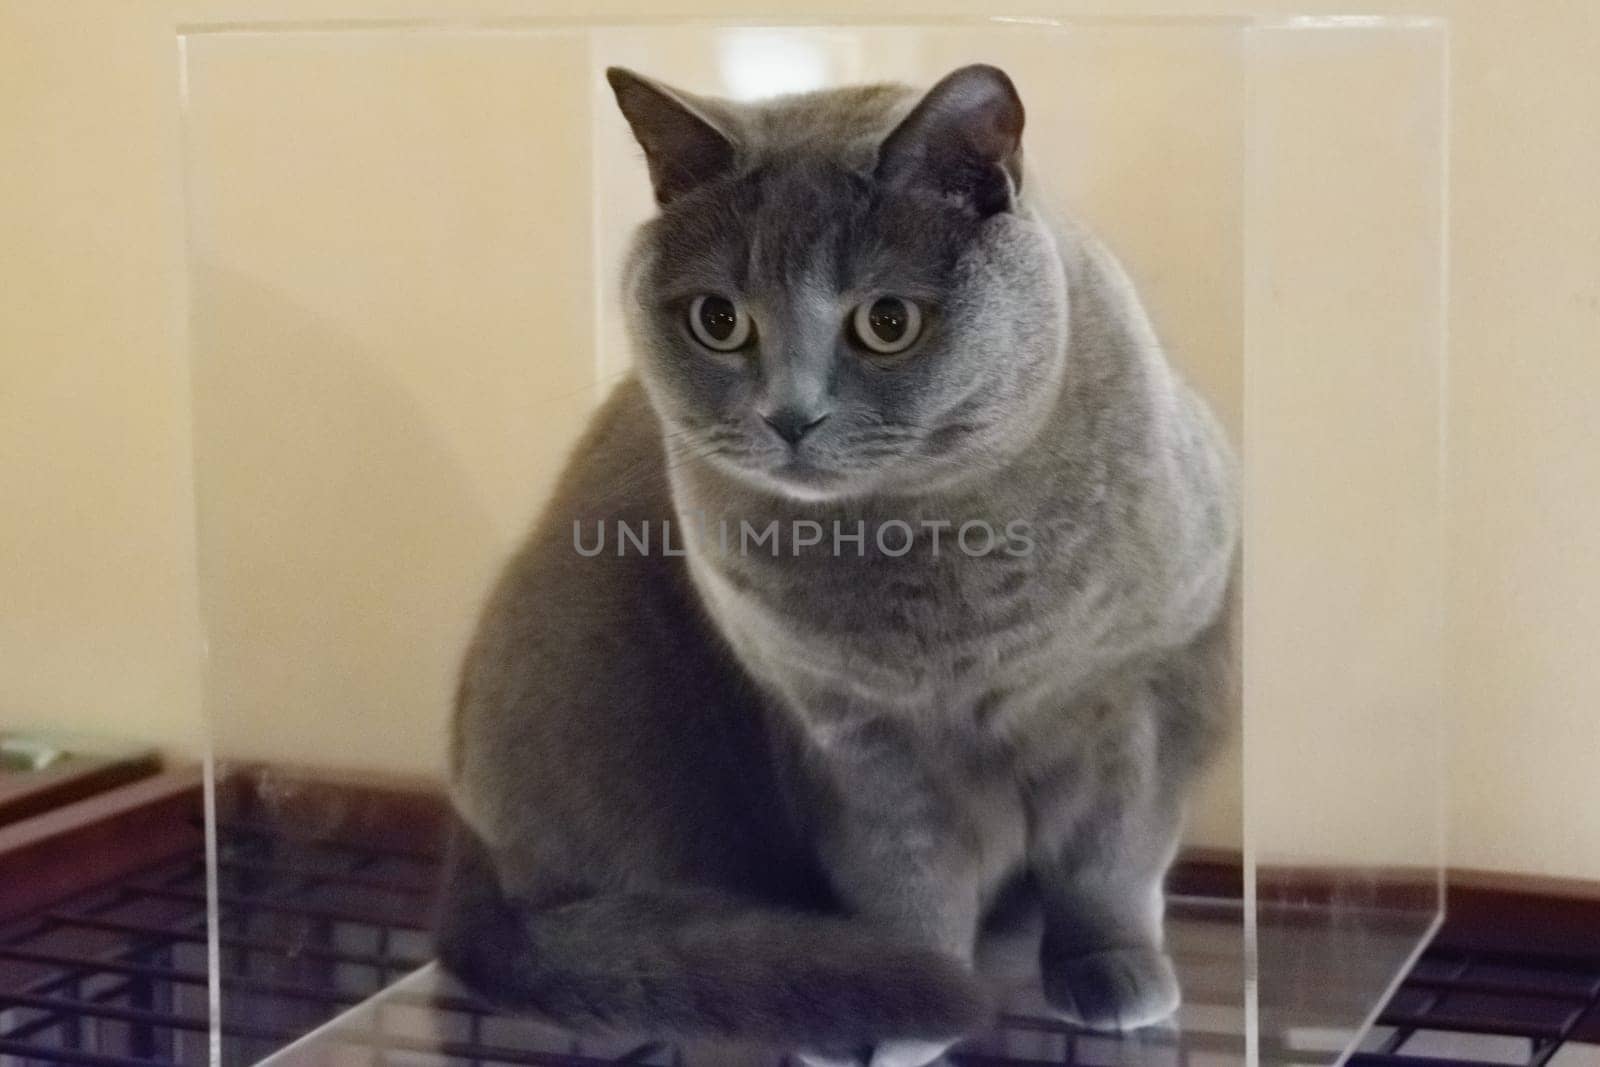 Gray domestic cat sitting in a transparent plastic cuboid box, looking alert and curious.